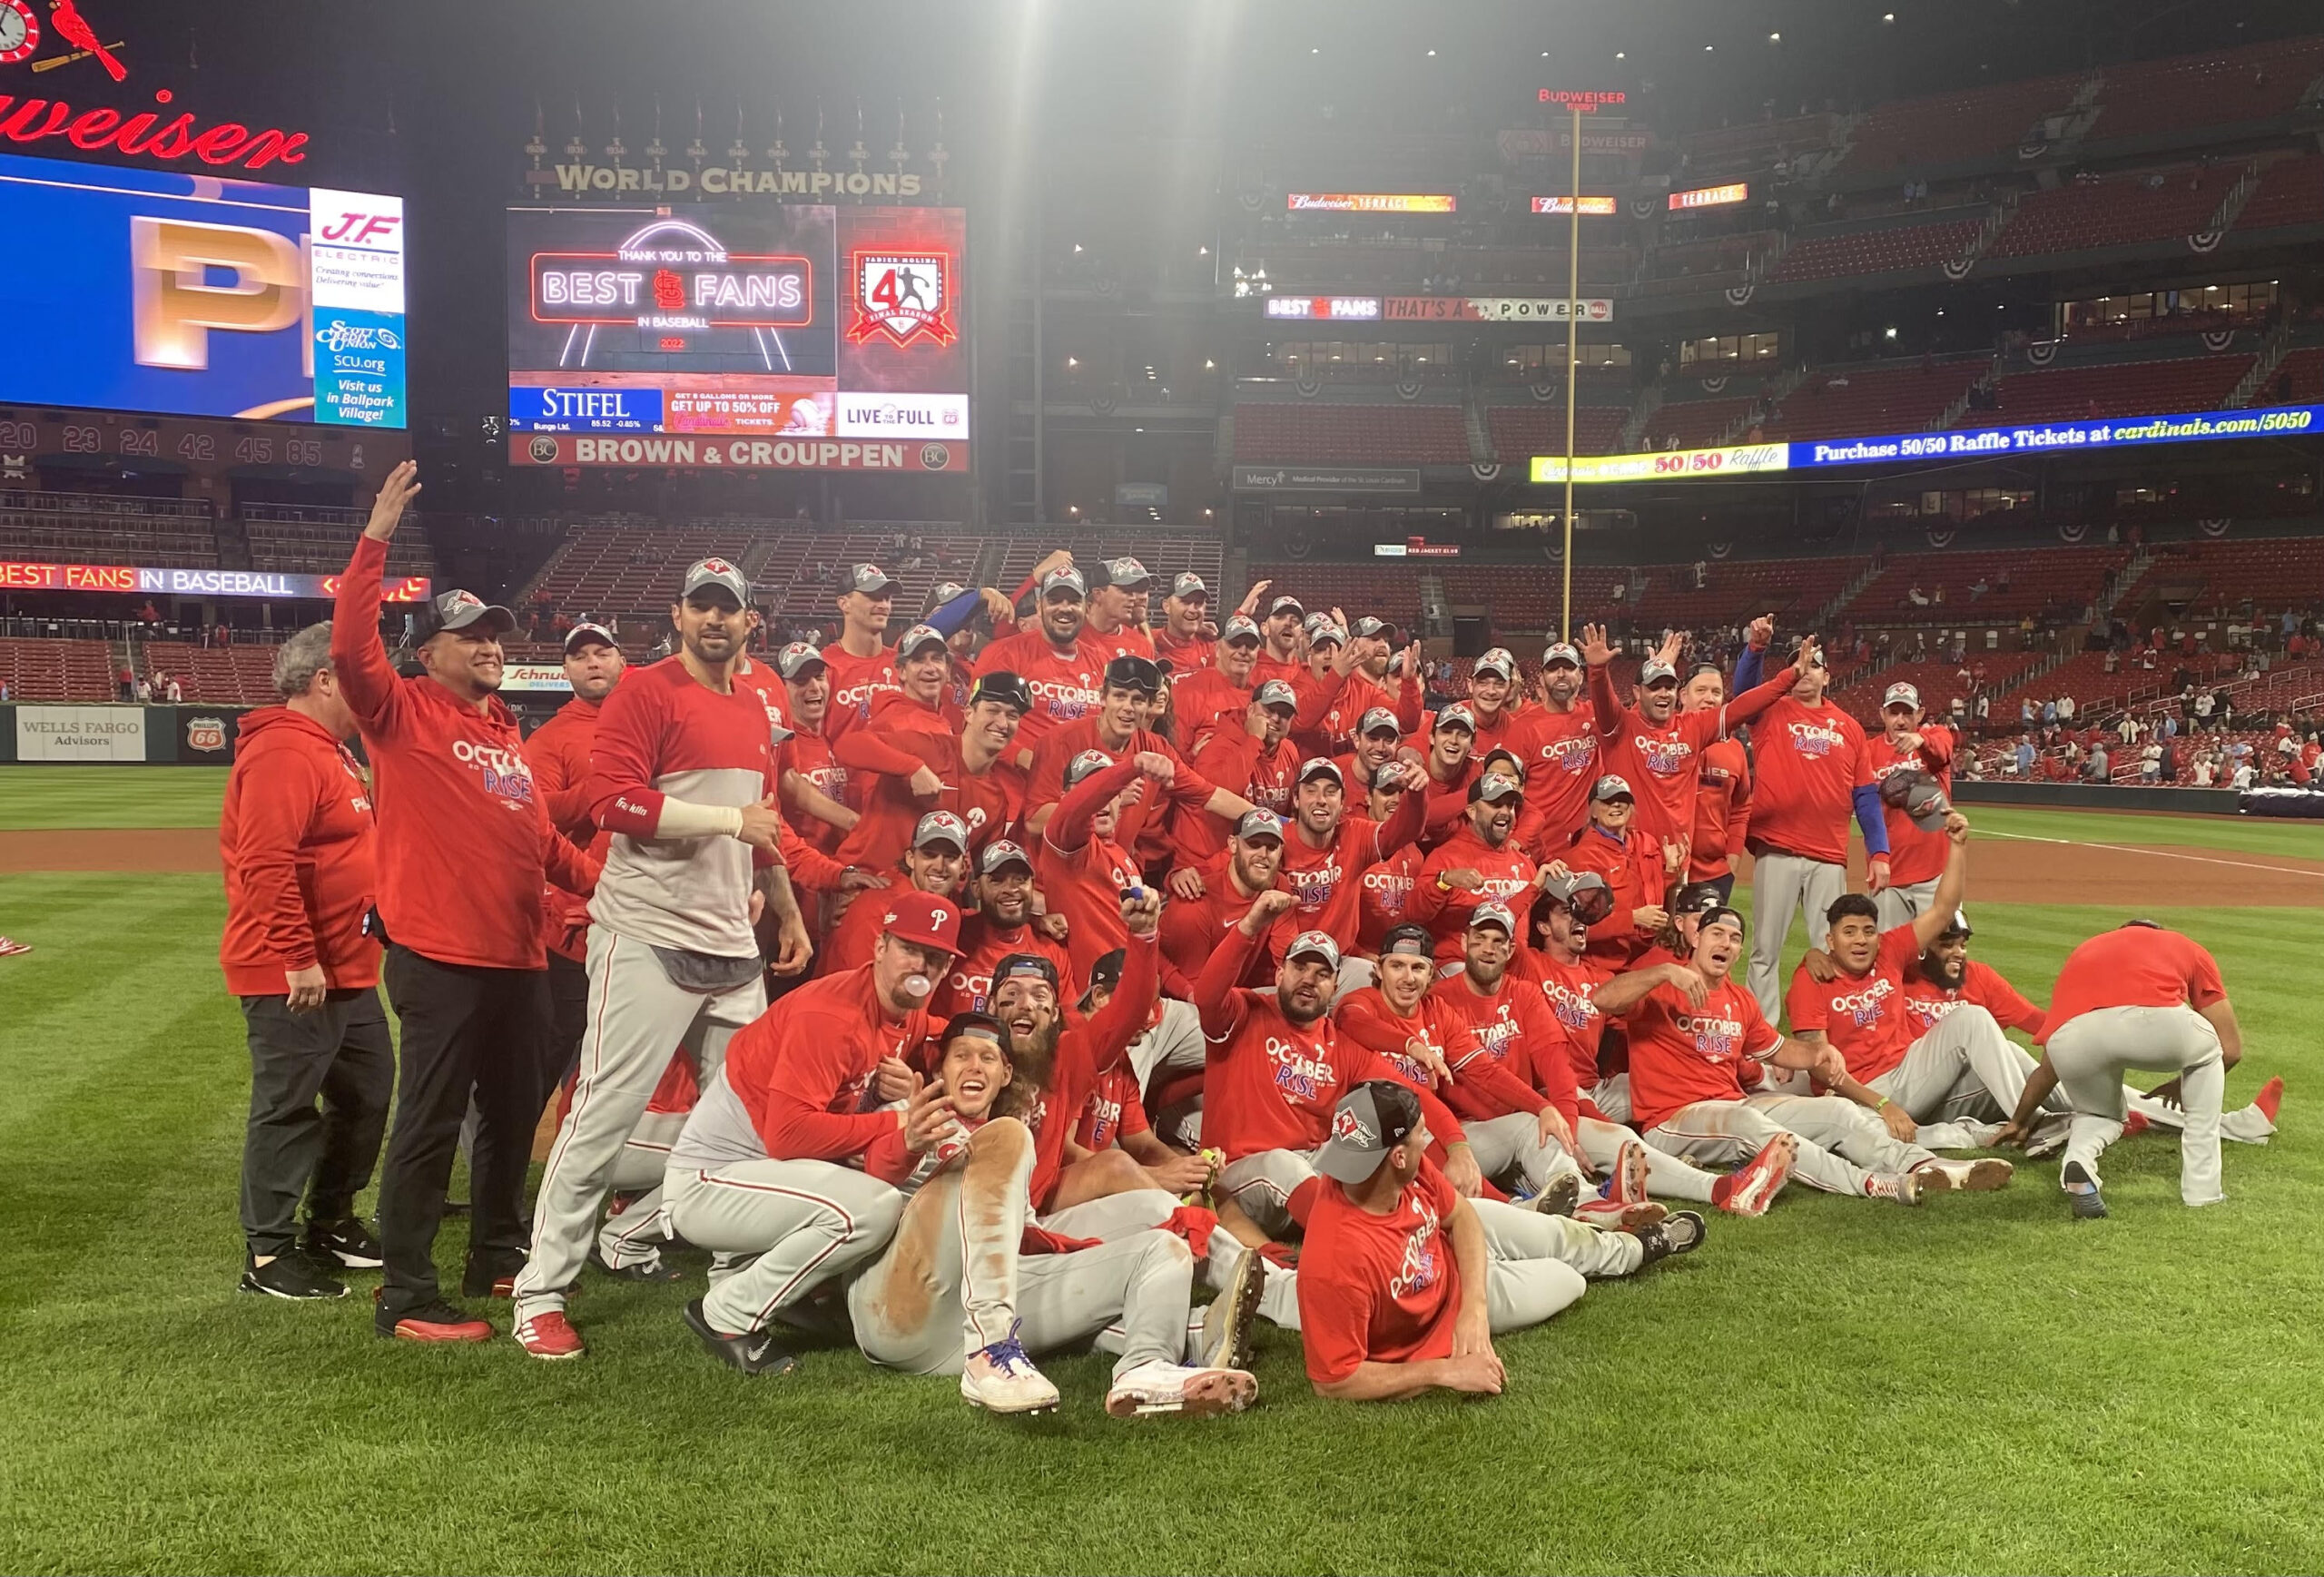 Phillies excited to bring Red October back to Philly